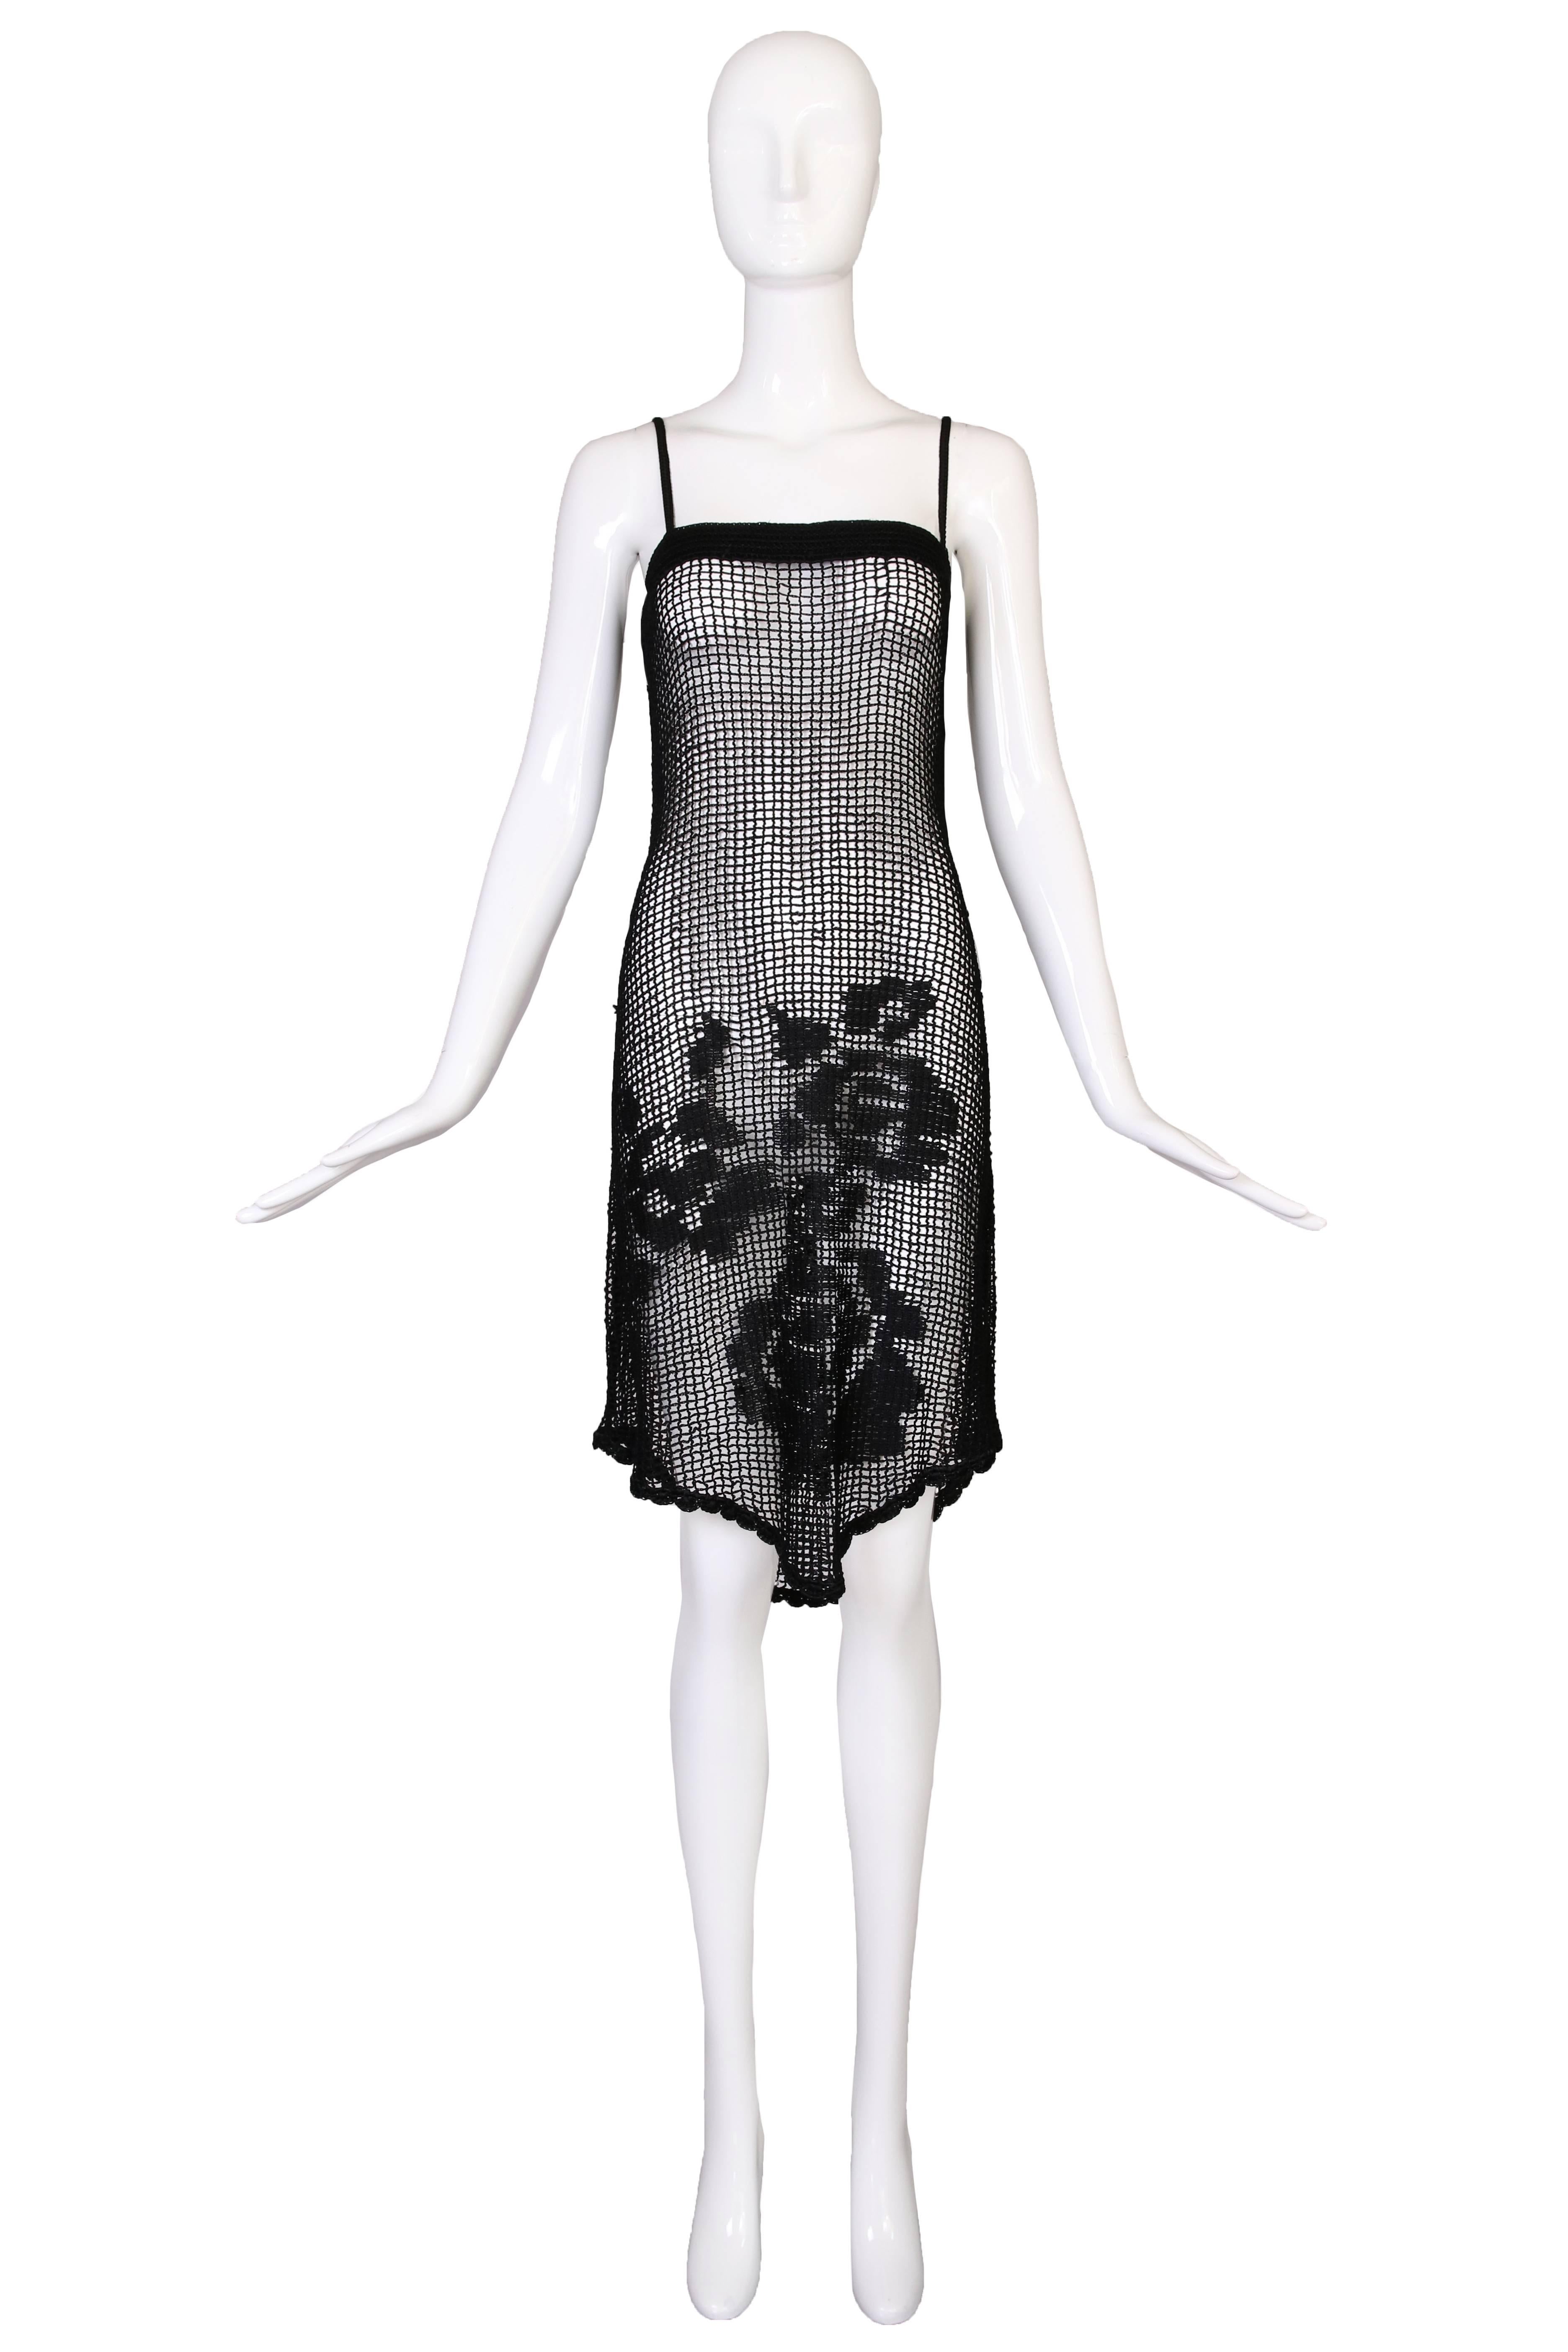 Dolce & Gabbana black crochet spaghetti strap dress with flower detail at the bottom front and dress back. Size M. In excellent condition.
MEASUREMENTS:
Bust - 36